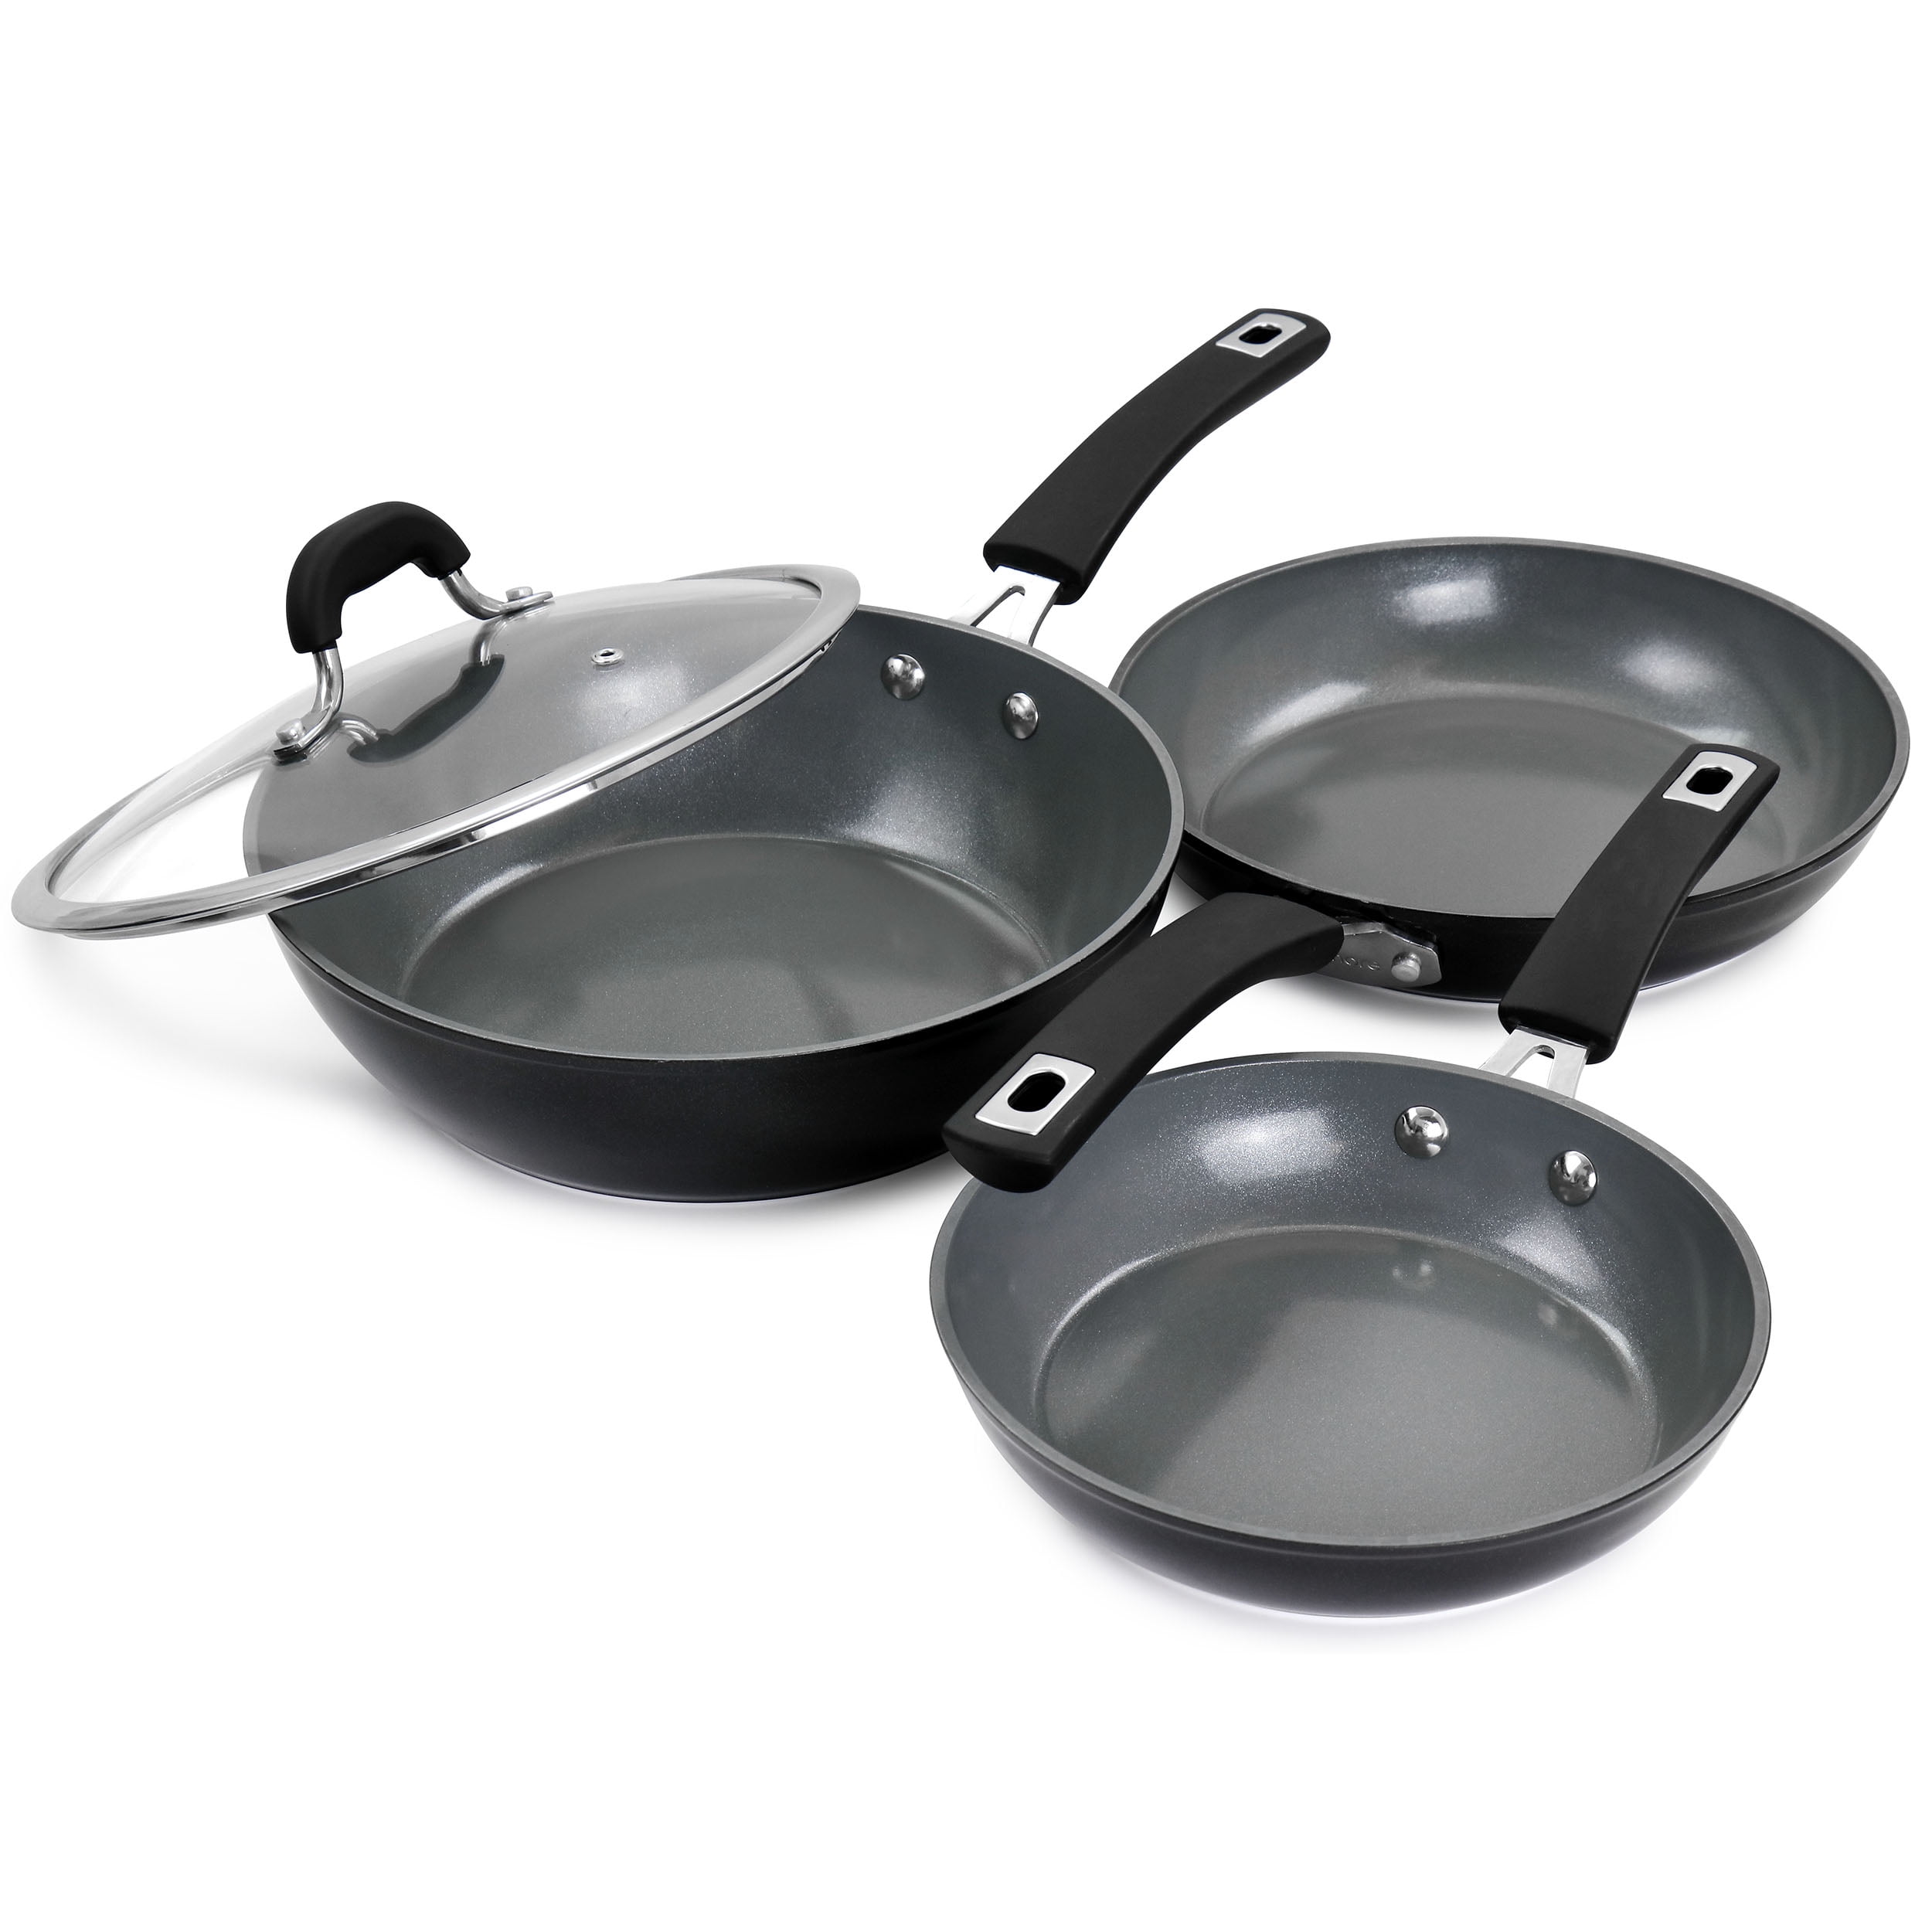 Kenmore Theodore 13 inch Nonstick Cast Aluminum Saute Pan with Lid